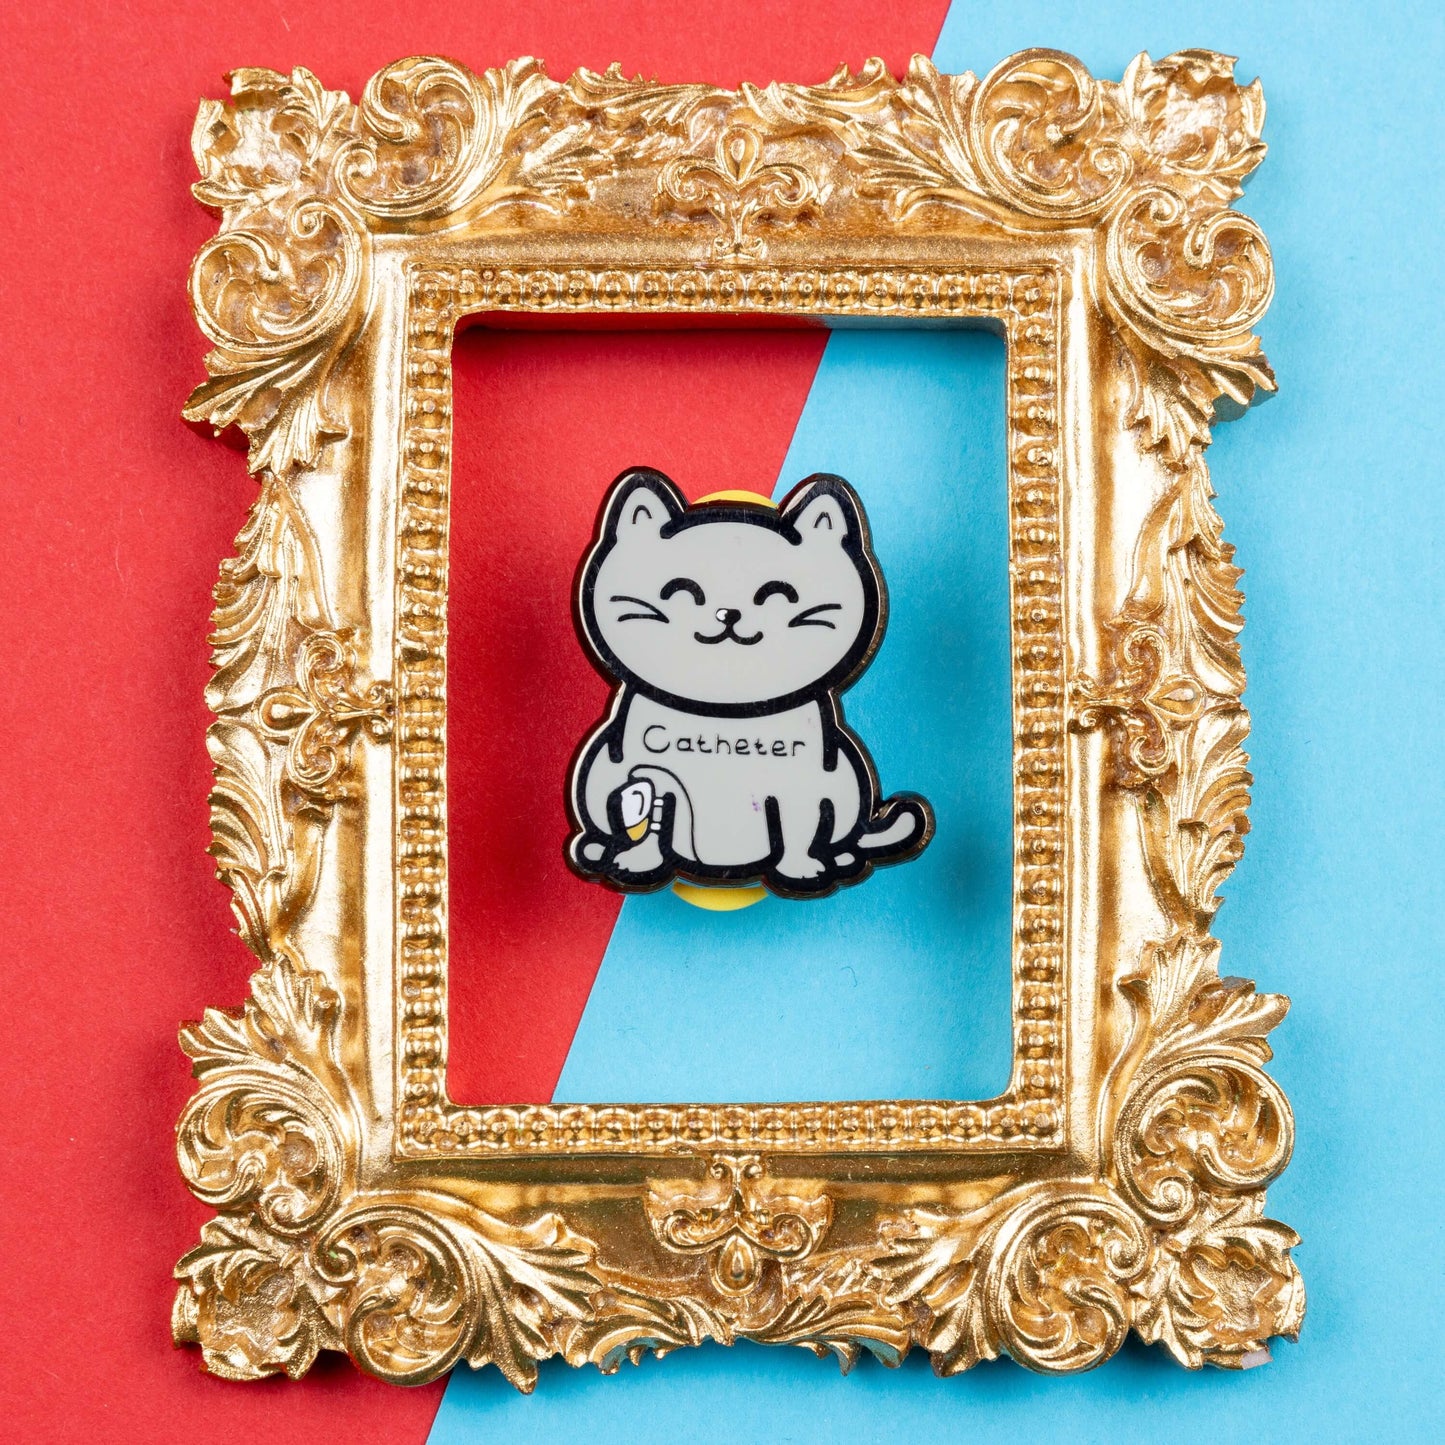 The Catheter Enamel Pin - Catheter on a red and blue card background inside a gold ornate frame. The pin is a grey smiling cat sat down with a urine drainage Urostomy pouch strapped to its right leg and text across its chest reading 'catheter'. The pin is designed to raise awareness for bladder problems such as UTIs and other chronic illnesses.